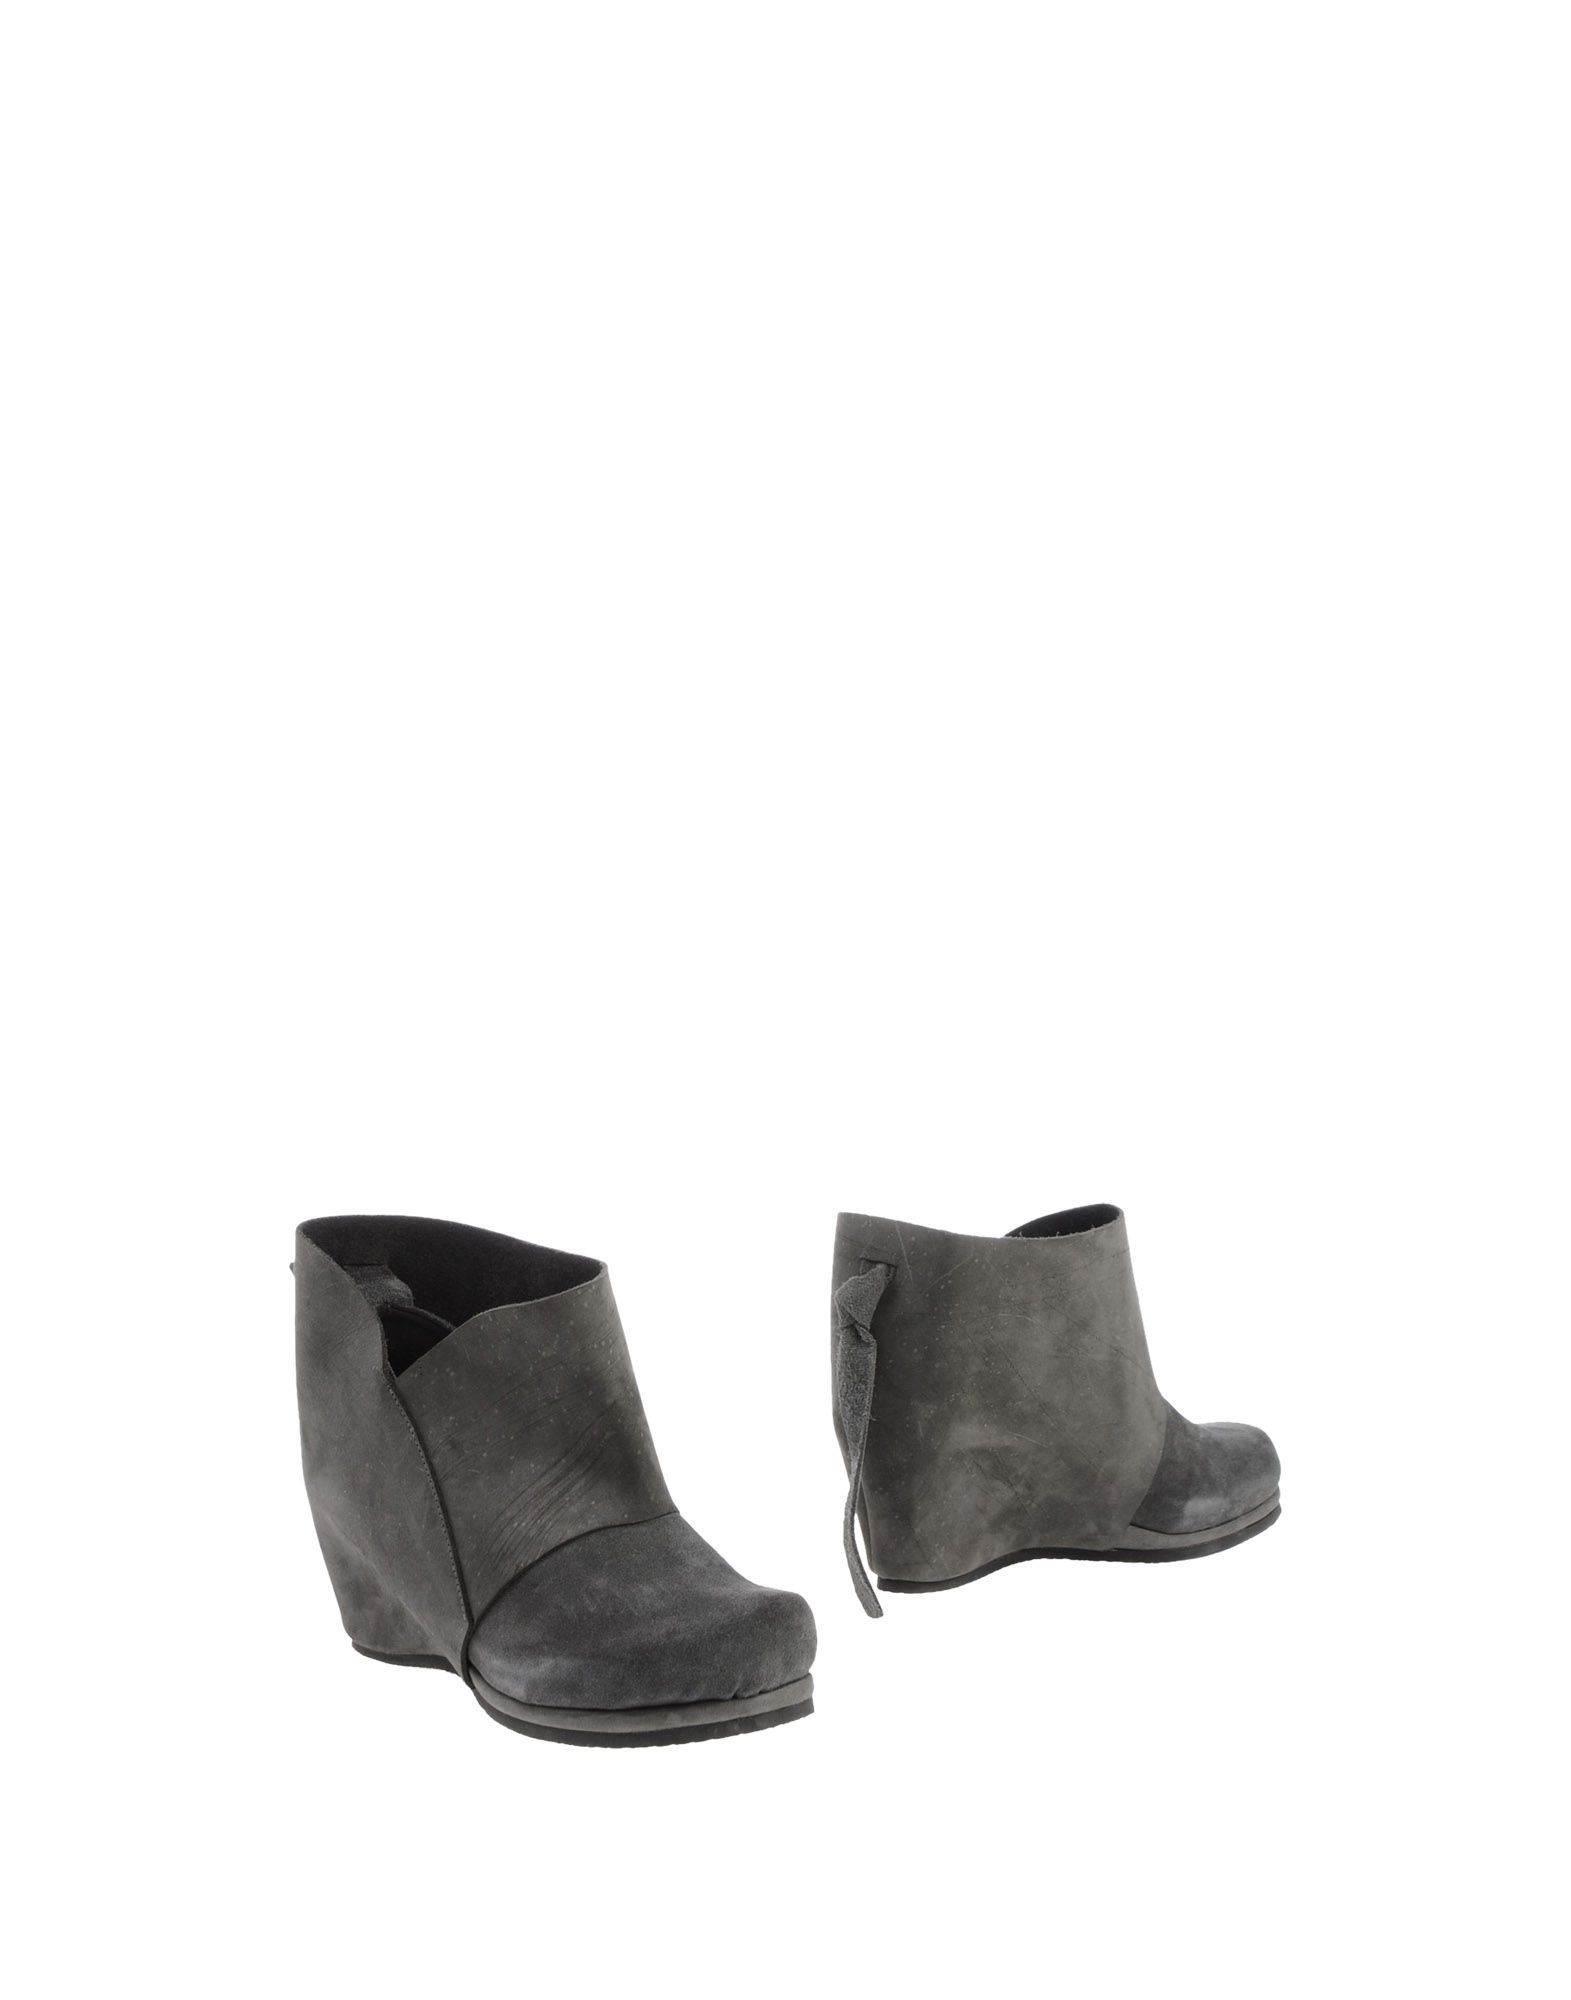 Peter Non Ankle Boots in Gray (Lead) | Lyst